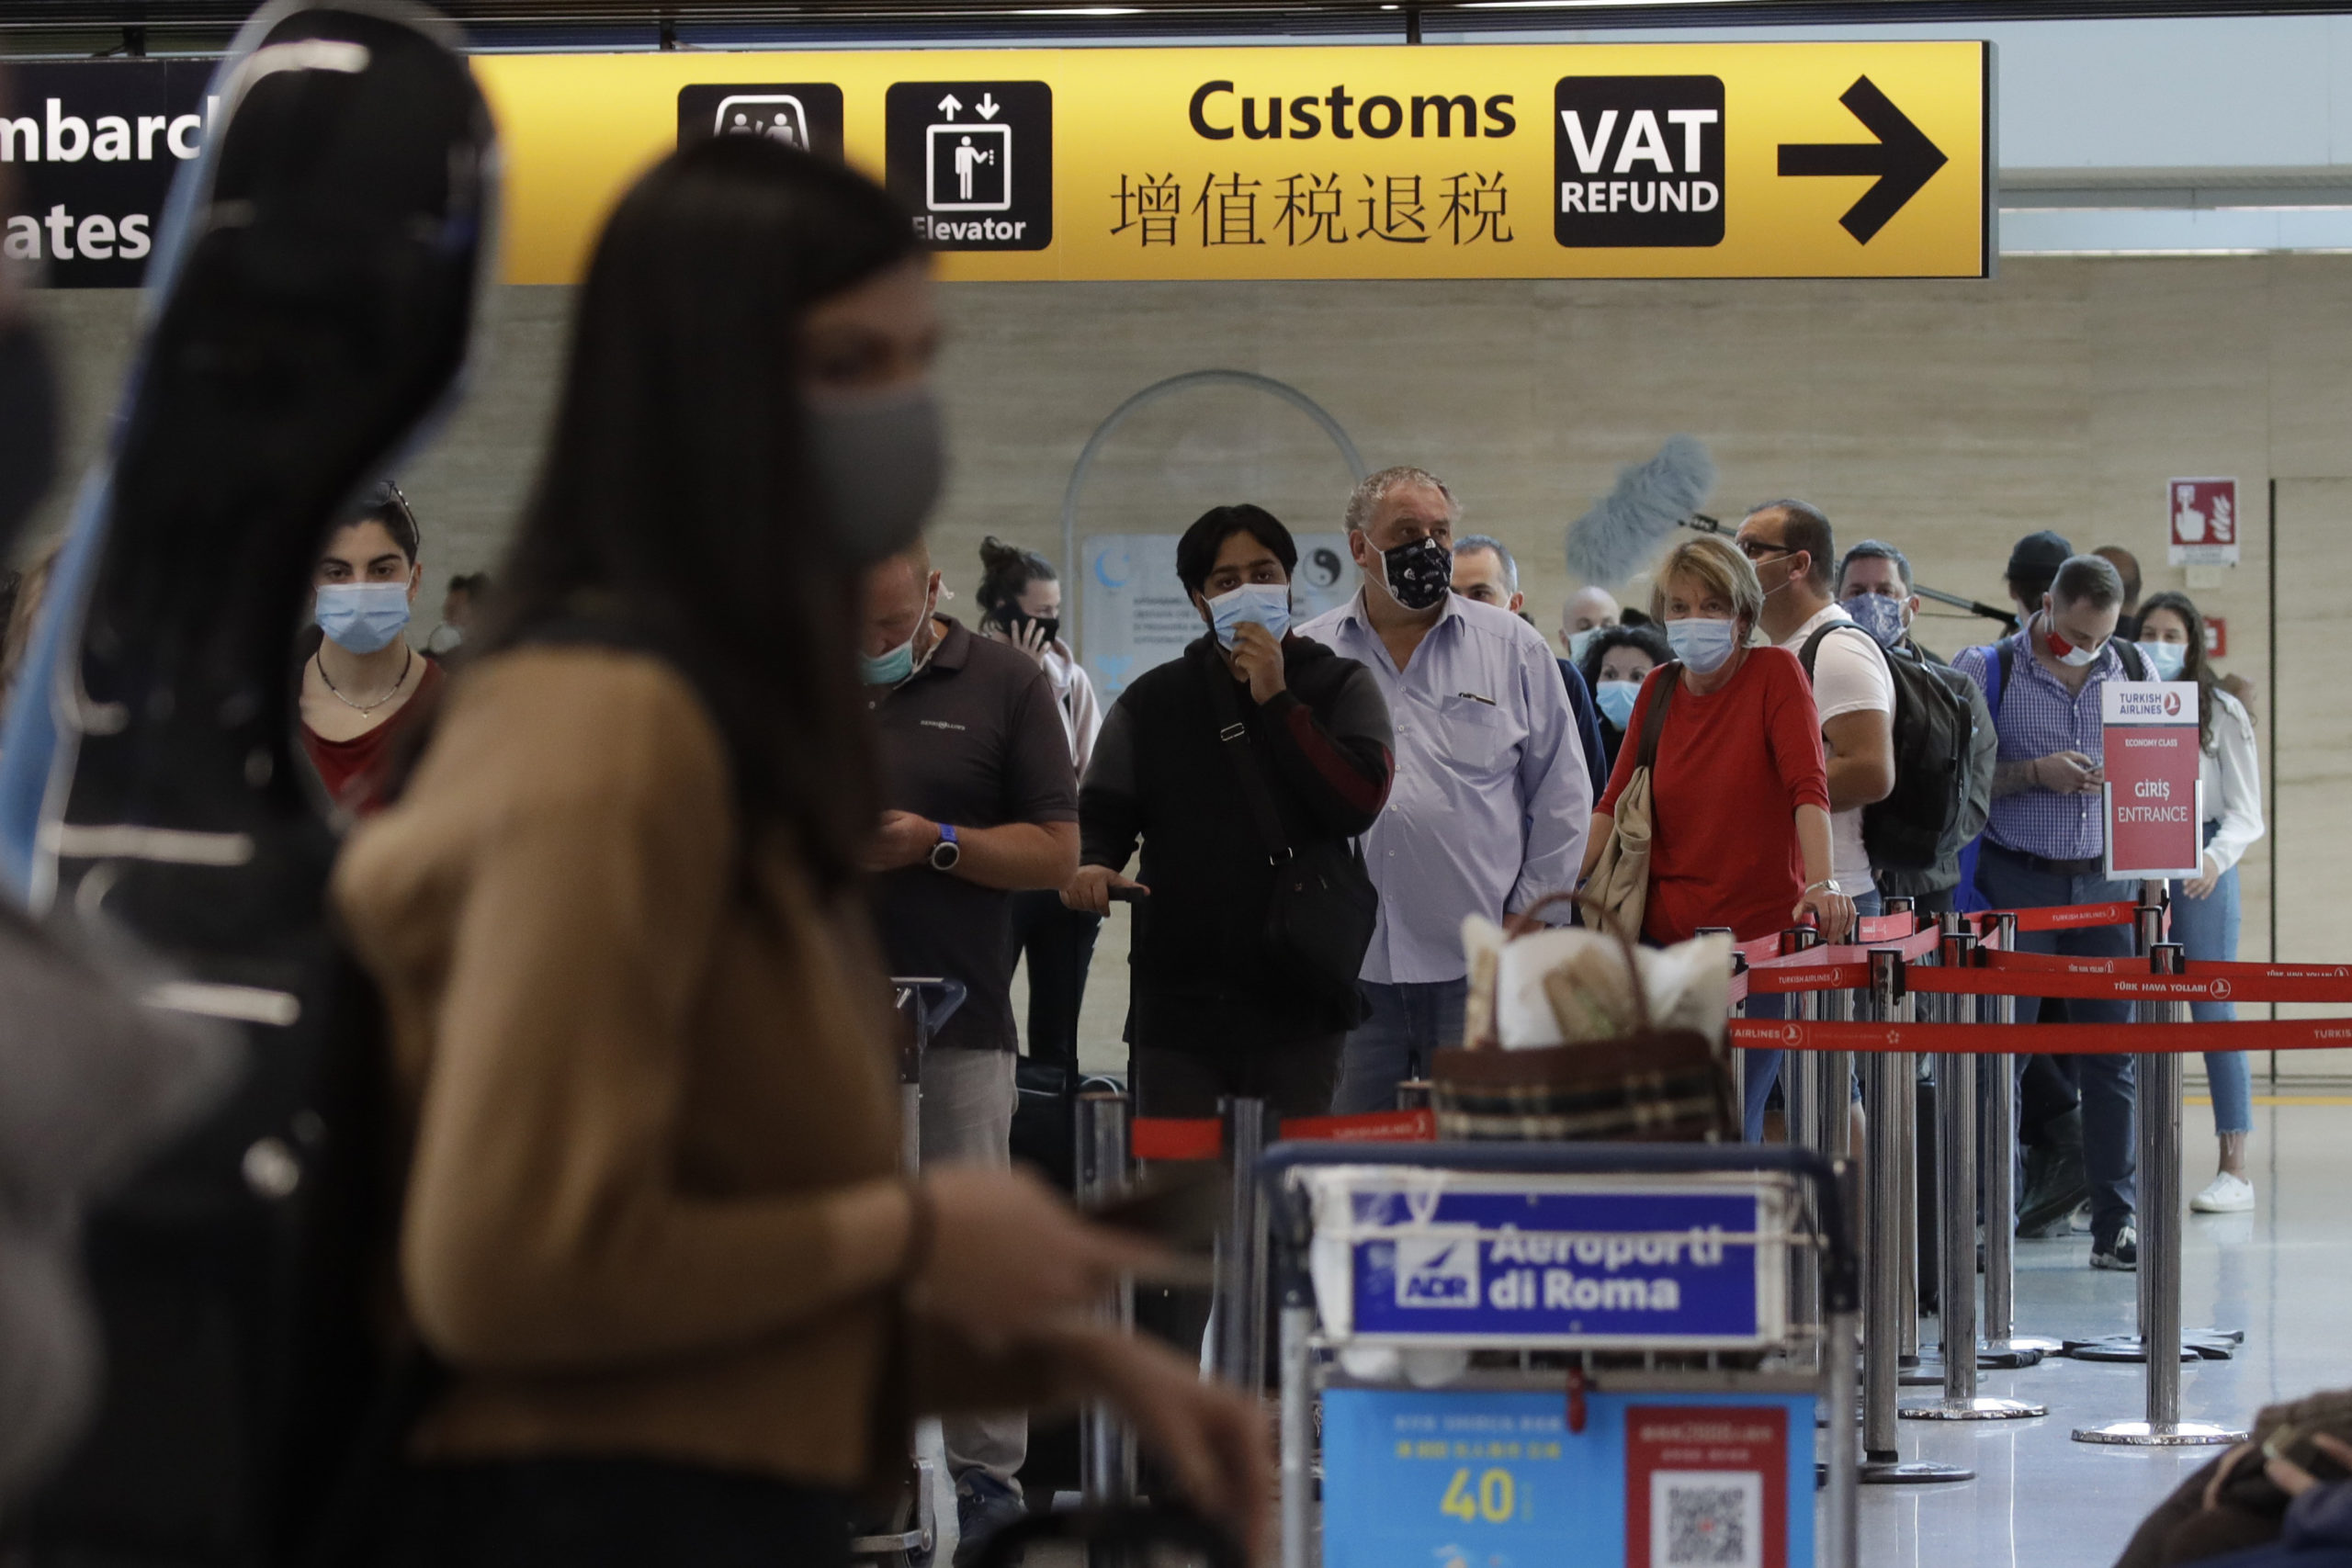 People wait in line at the check in for a flight to Dusseldorf, Germany, at Rome's Fiumicino airport, Wednesday, June 3, 2020. Italians and other EU citizens who got stuck in Italy during the coronavirus lockdown can now fly to European countries without restrictions and mandatory 14 days quarantine. (AP Photo/Alessandra Tarantino)